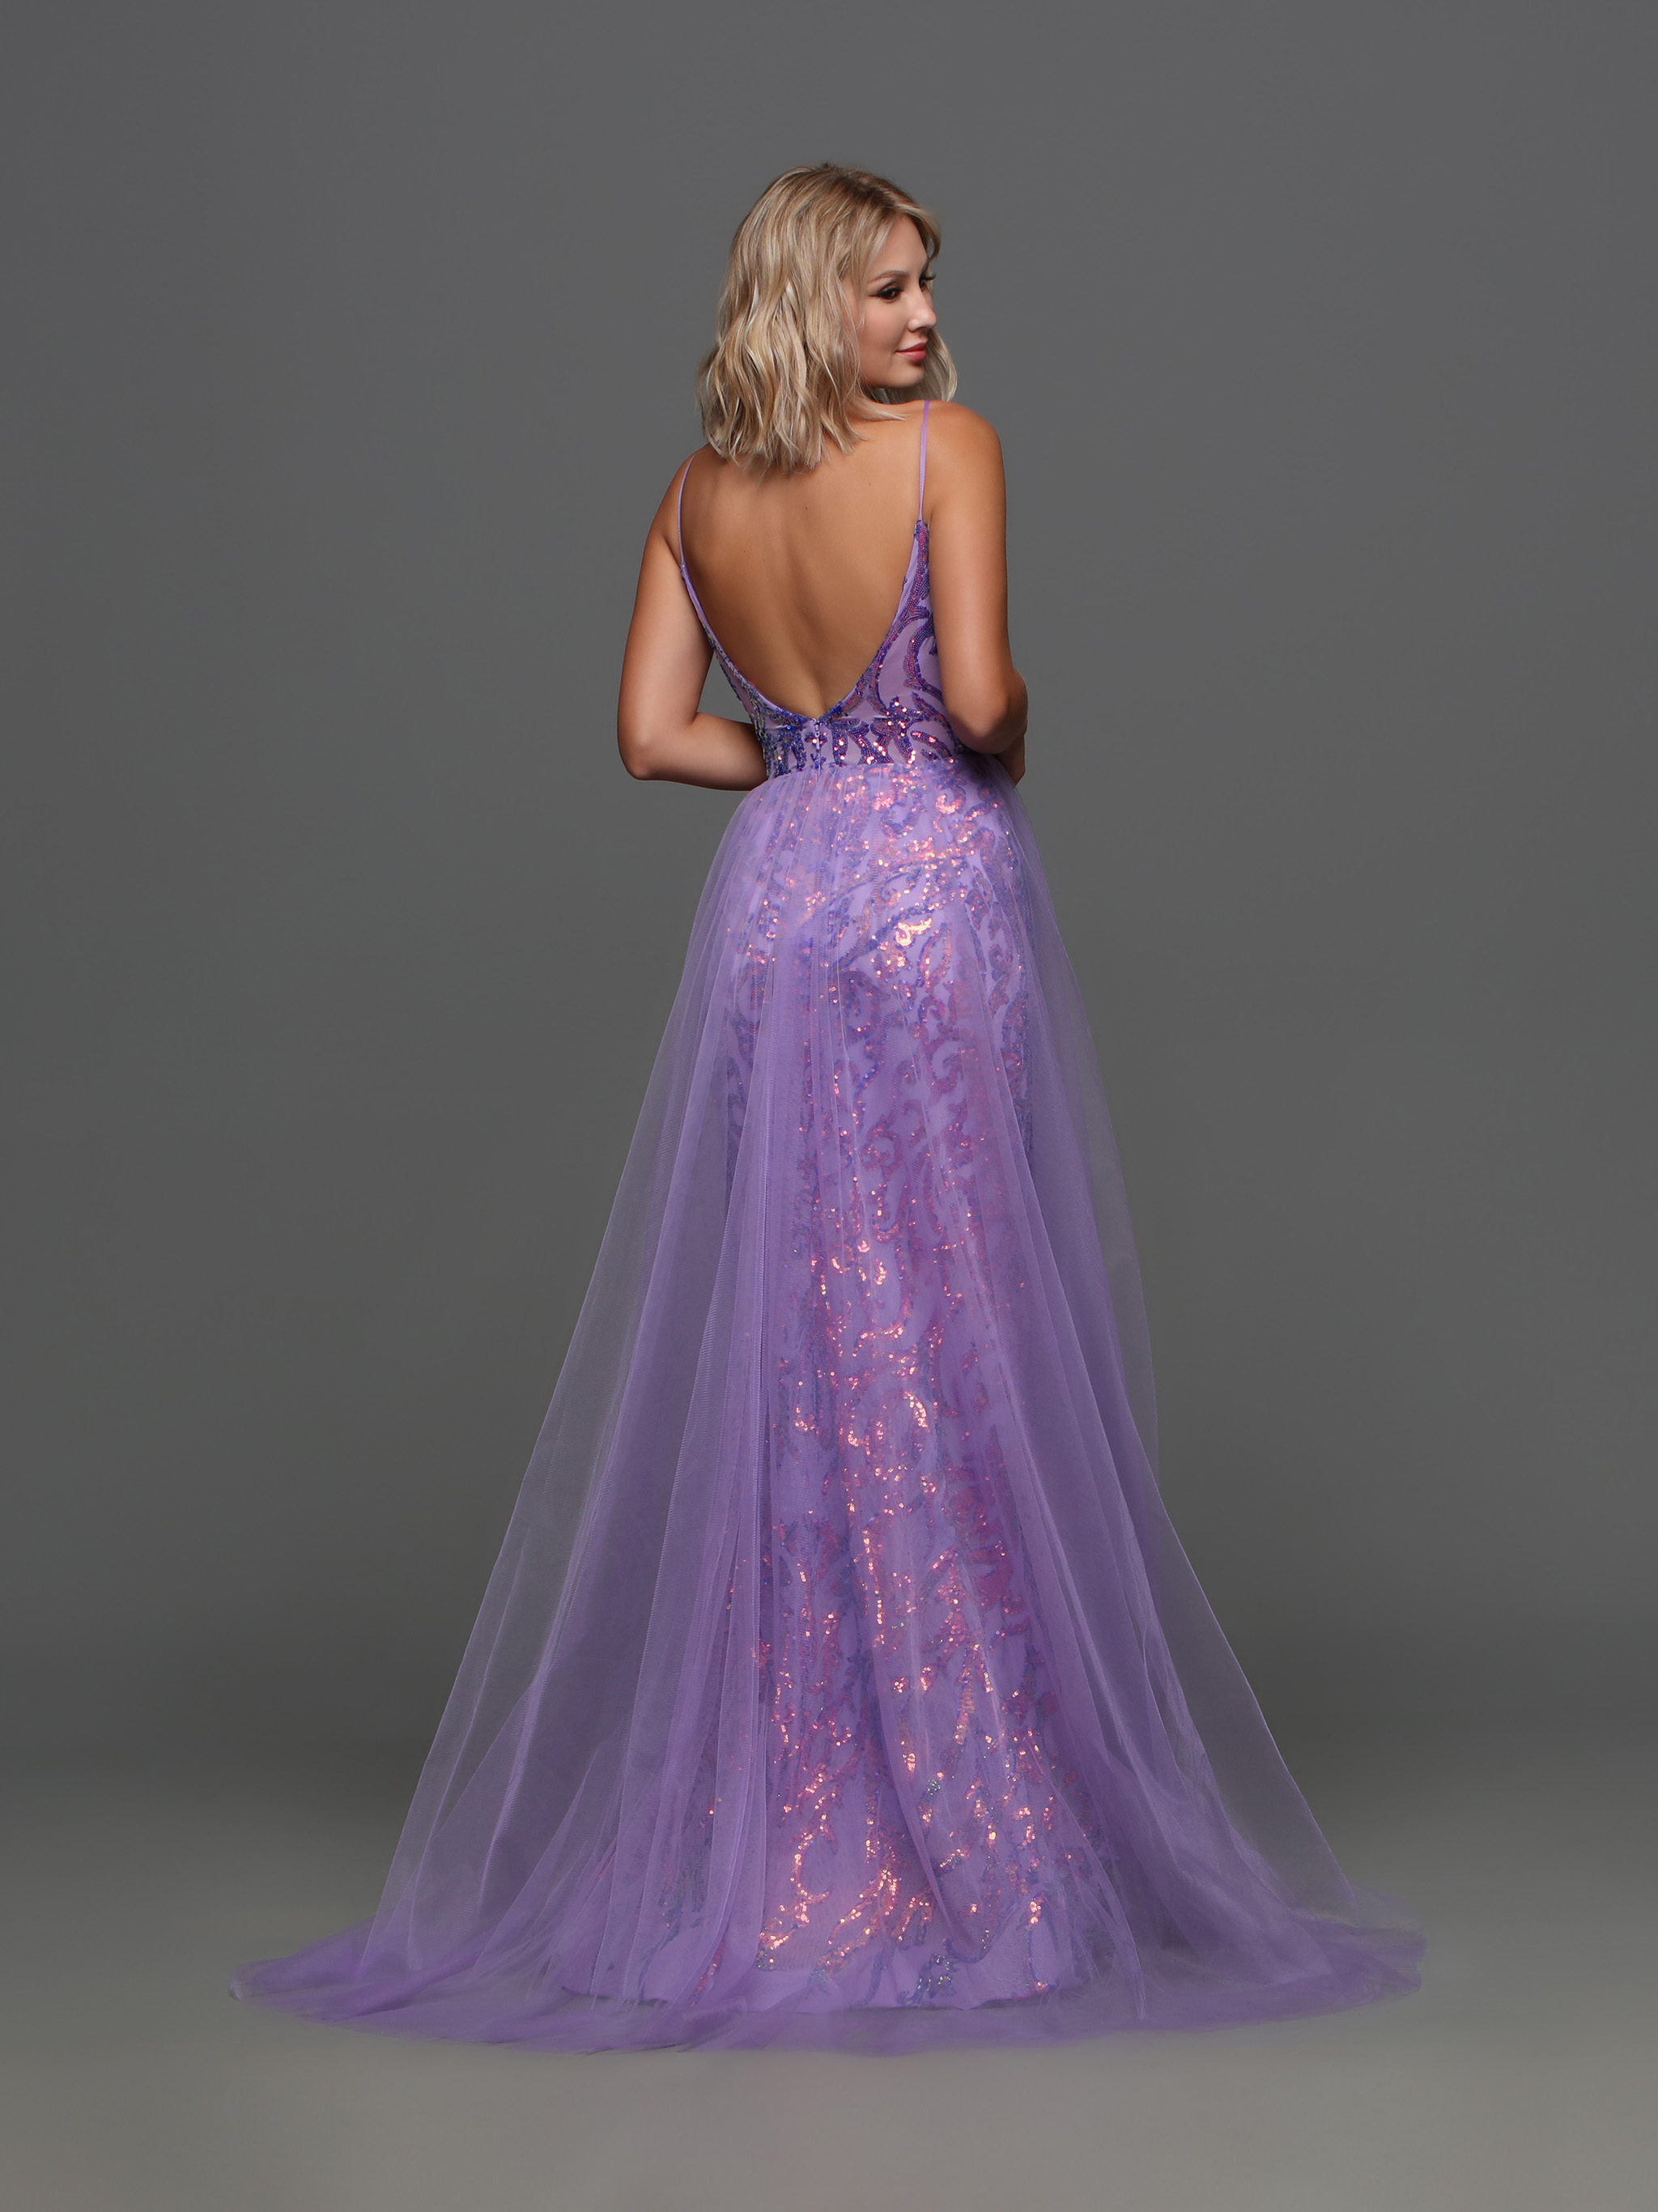 Image showing back view of style #72312